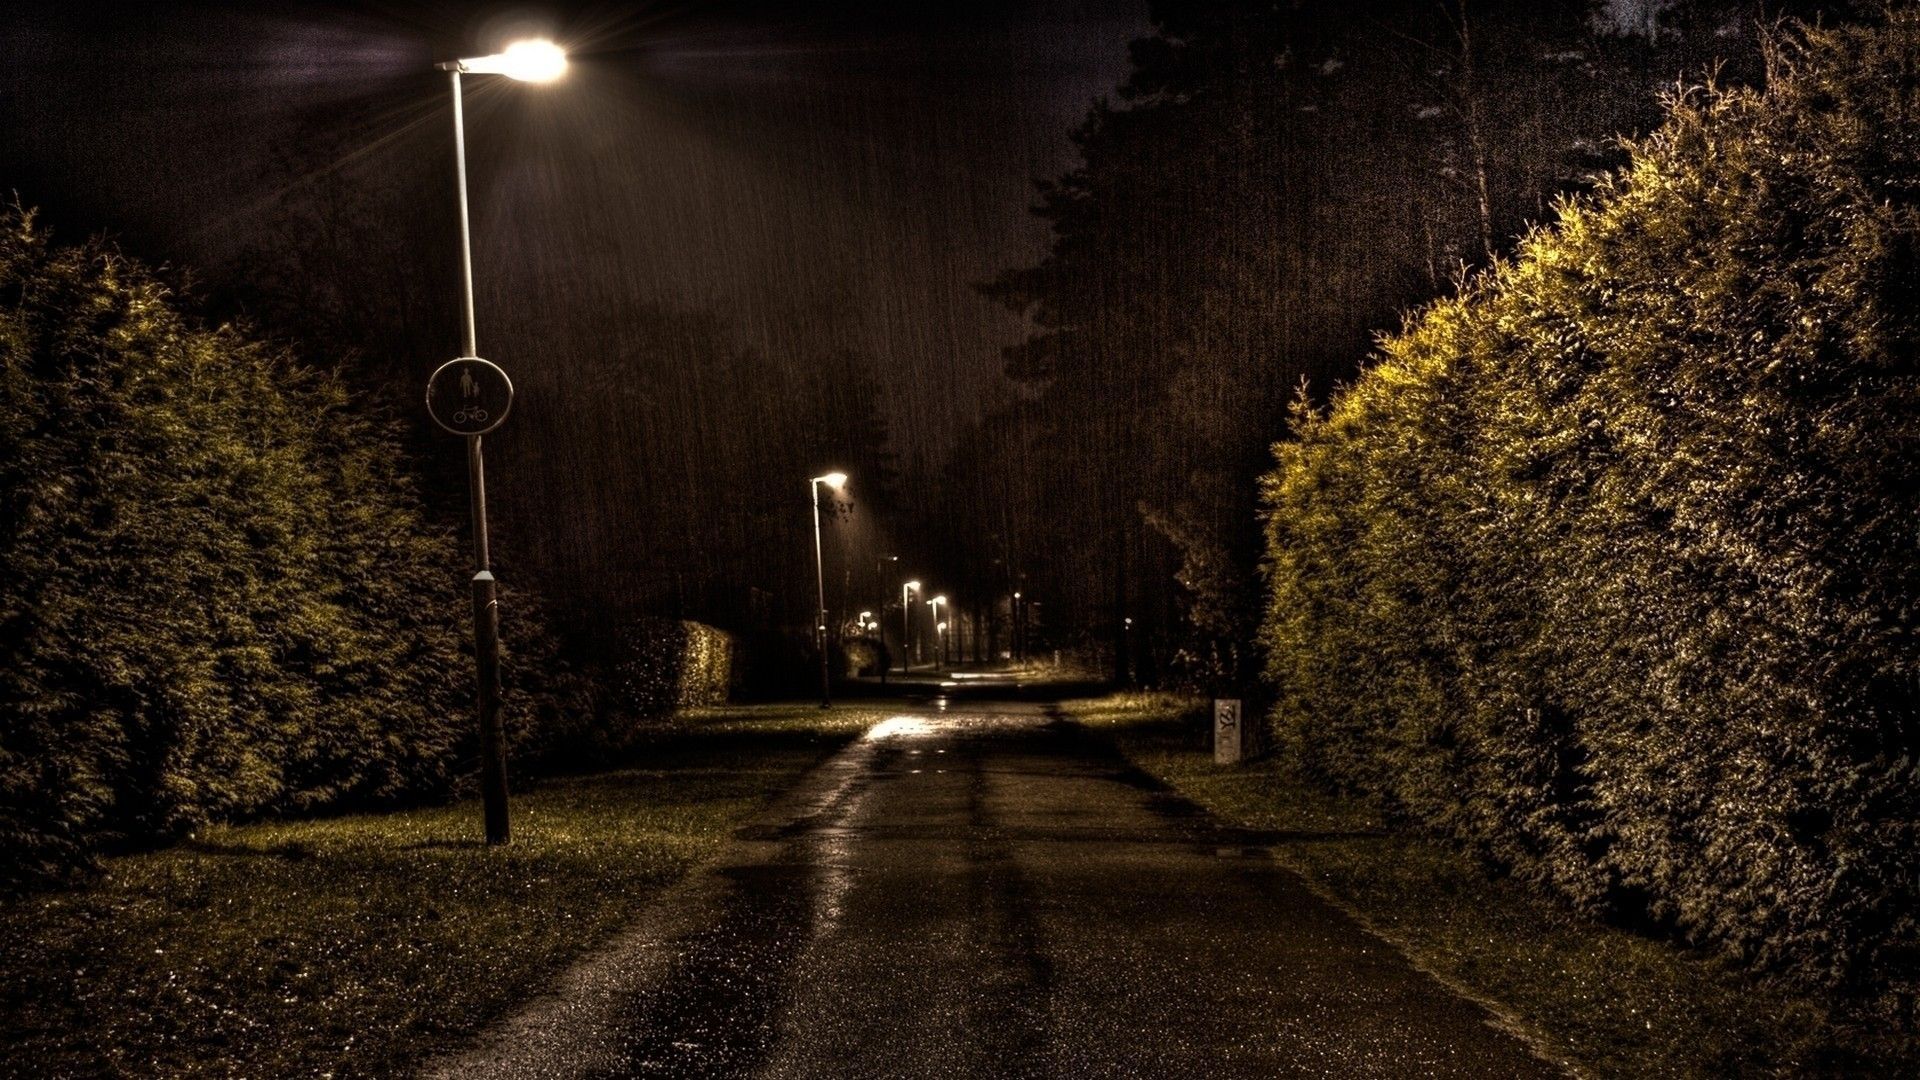 Rainy Night | HD Wallpapers | Pictures | Images | Backgrounds | Photos